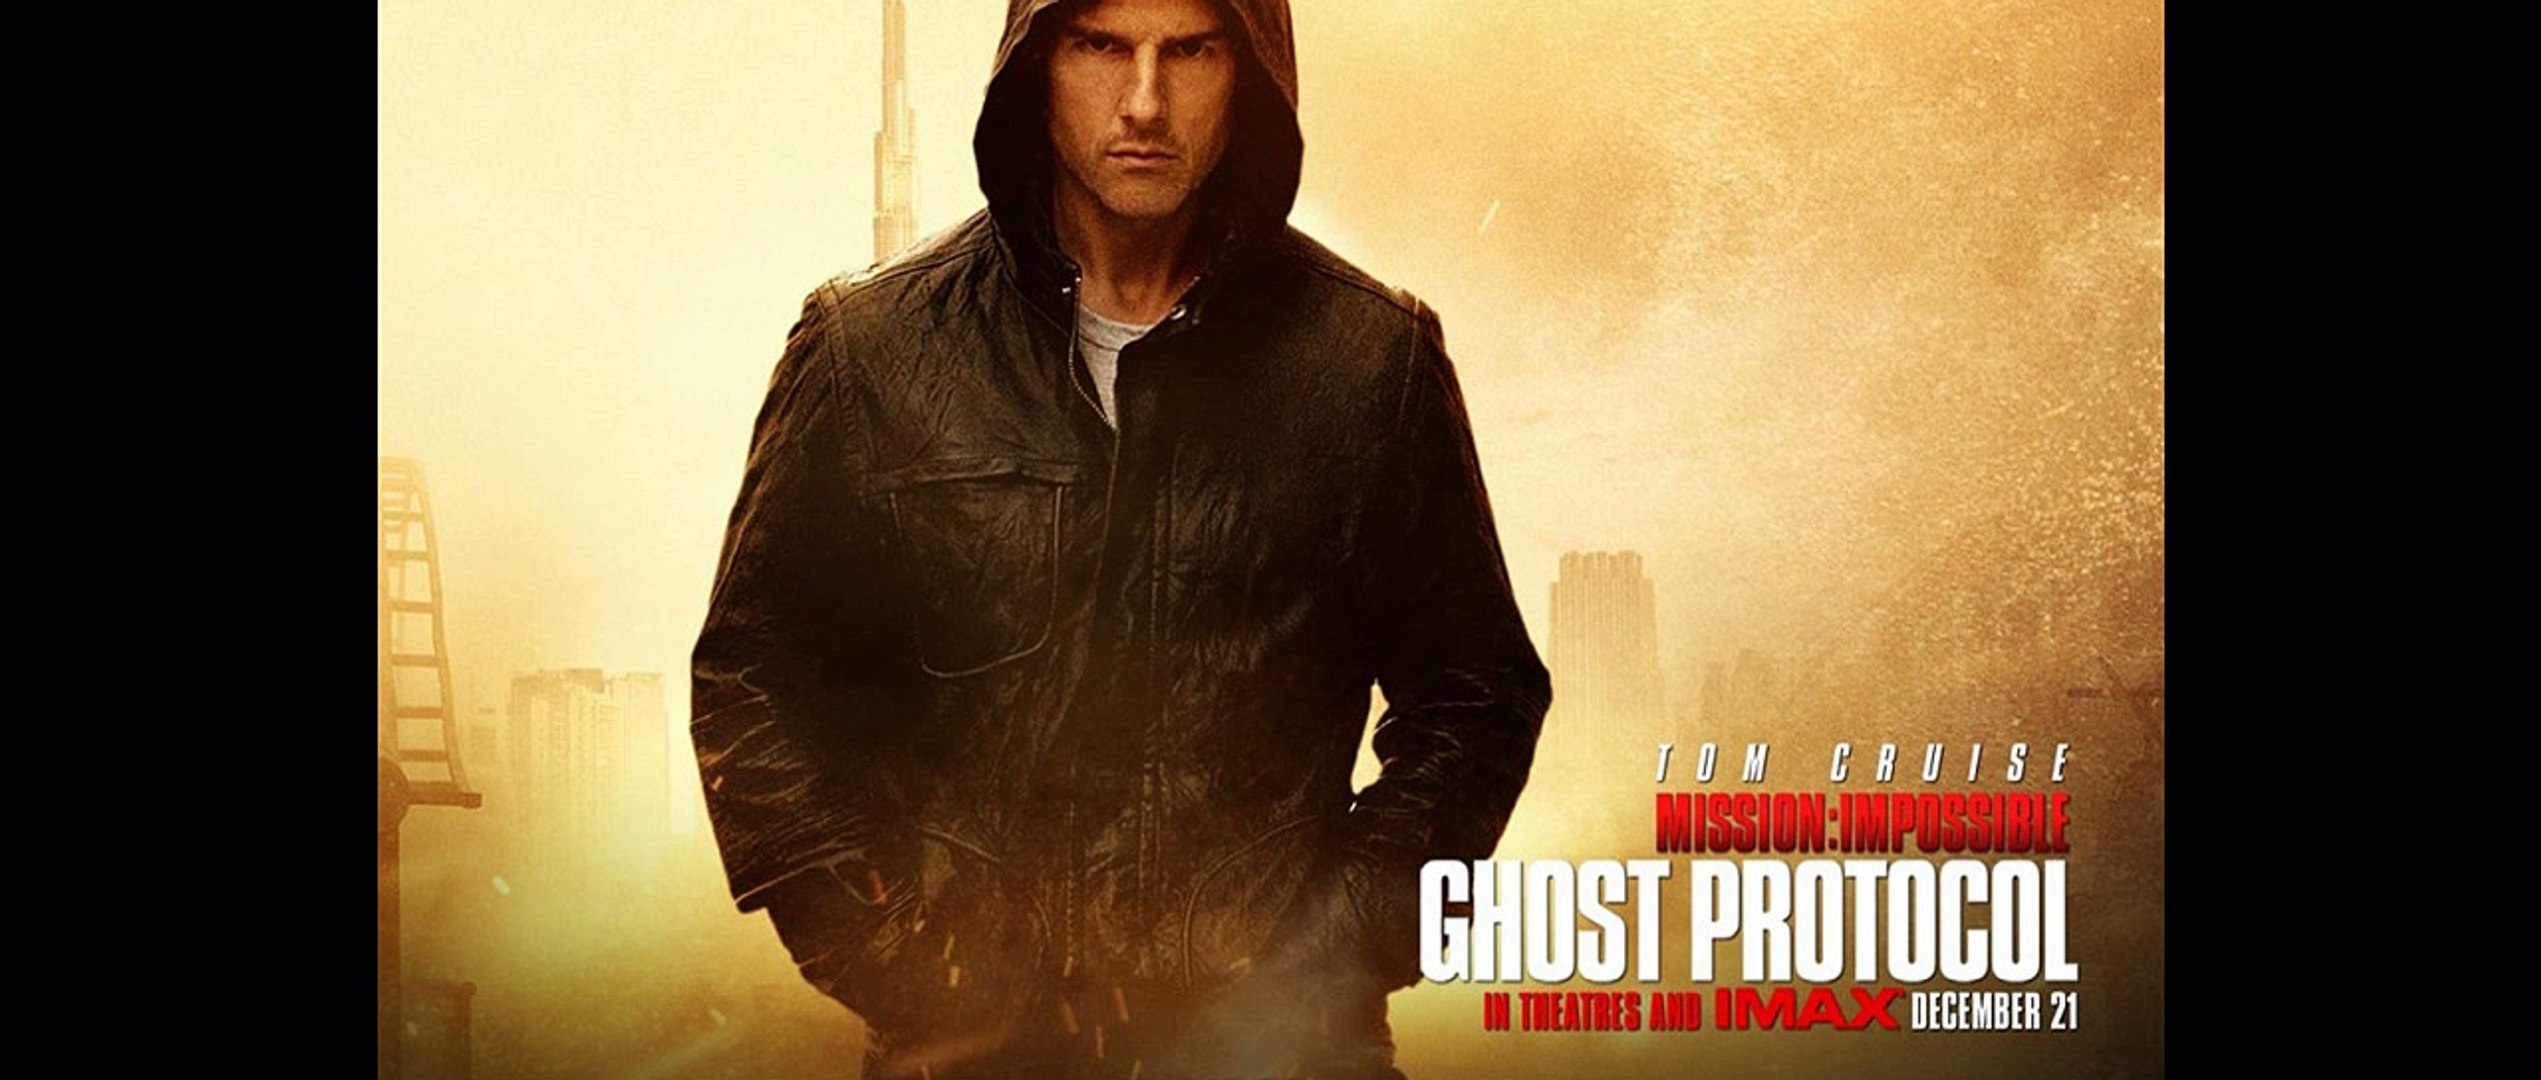 mission impossible 4 full movie download free